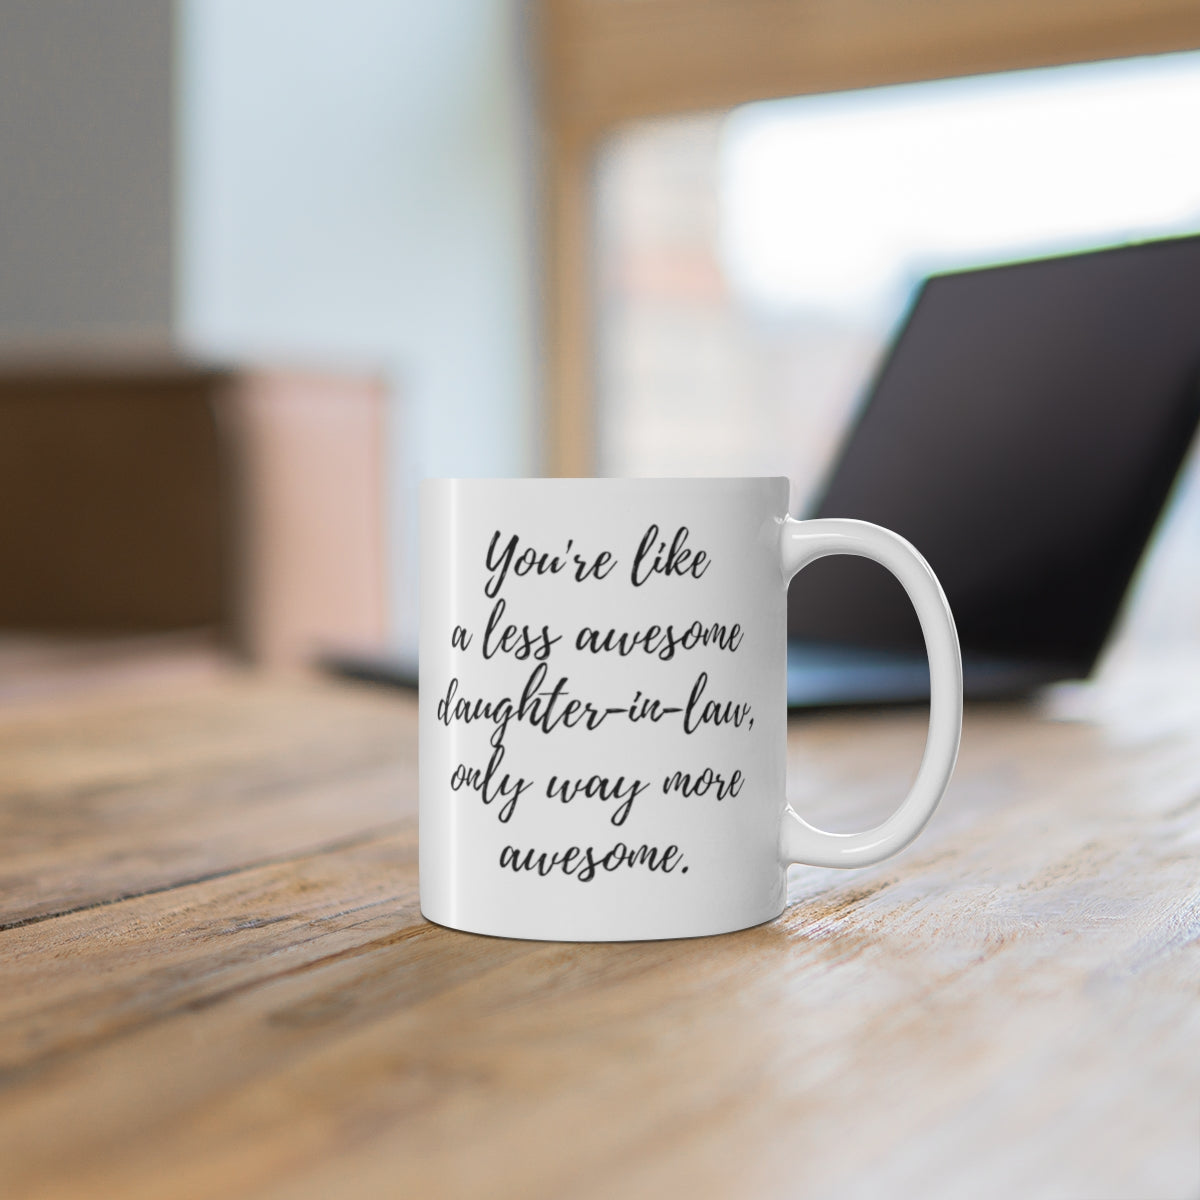 You're Like A Less Awesome Daughter-In-Law, Only Way More Awesome | Funny, Snarky Gift | White Ceramic Mug, Script Font